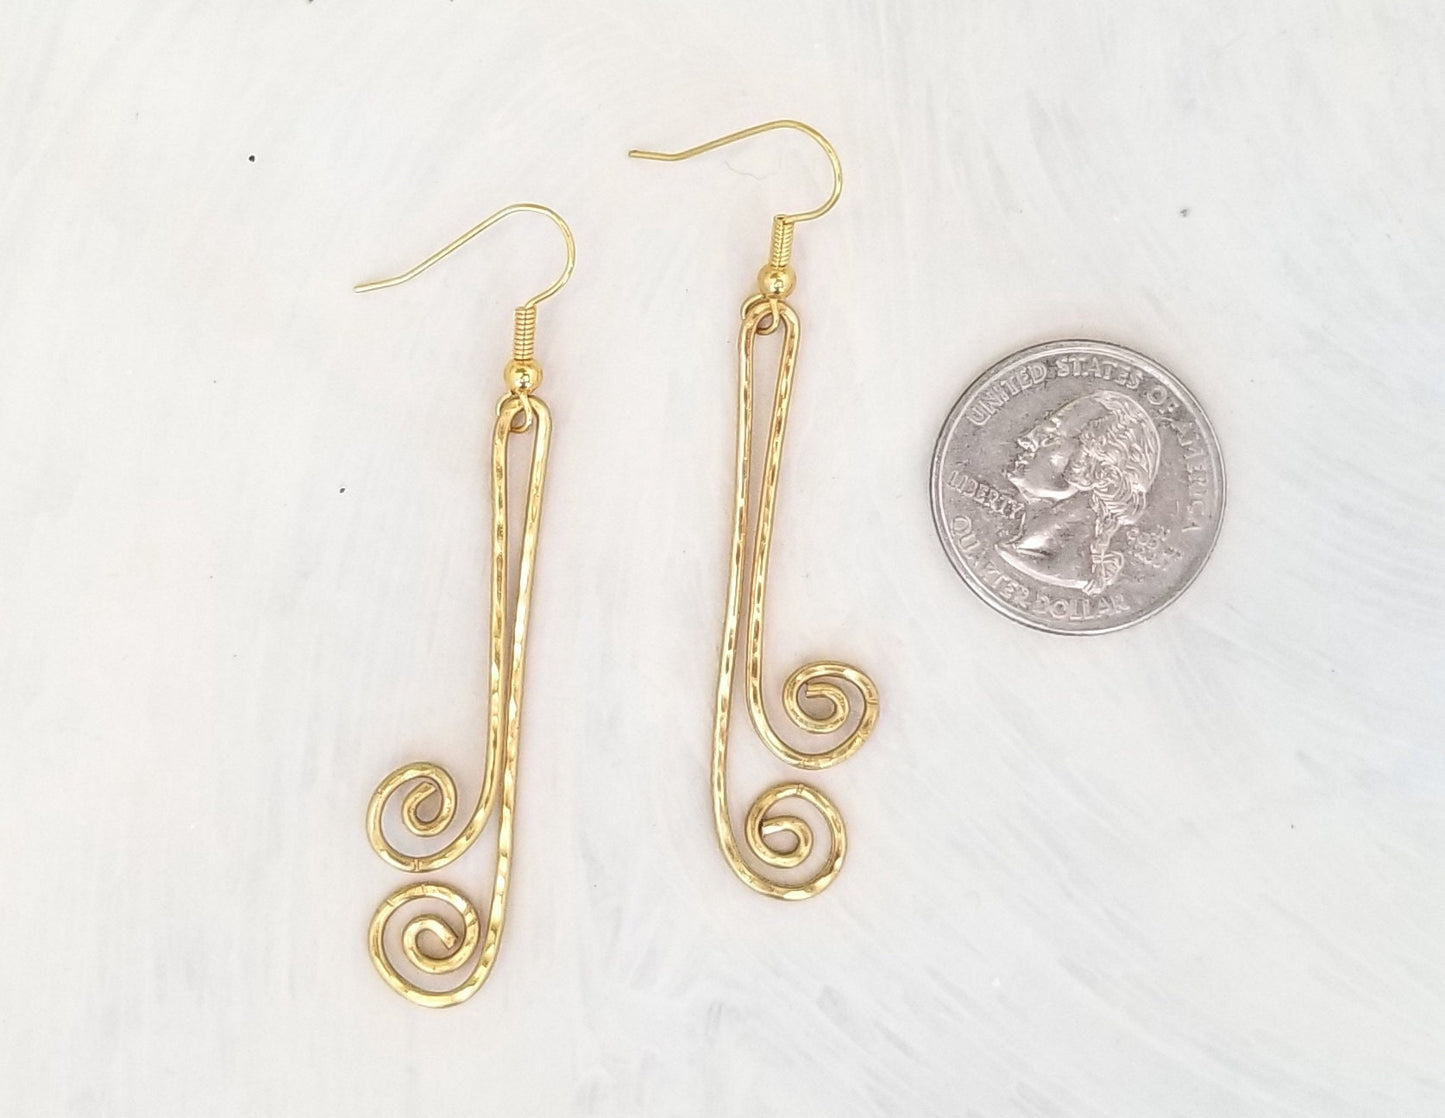 Hammered Spiral Wire Earrings, Long, Art Deco, Modern, Simple, Wedding, Bridesmaid, Choice of Metals and Closure Types